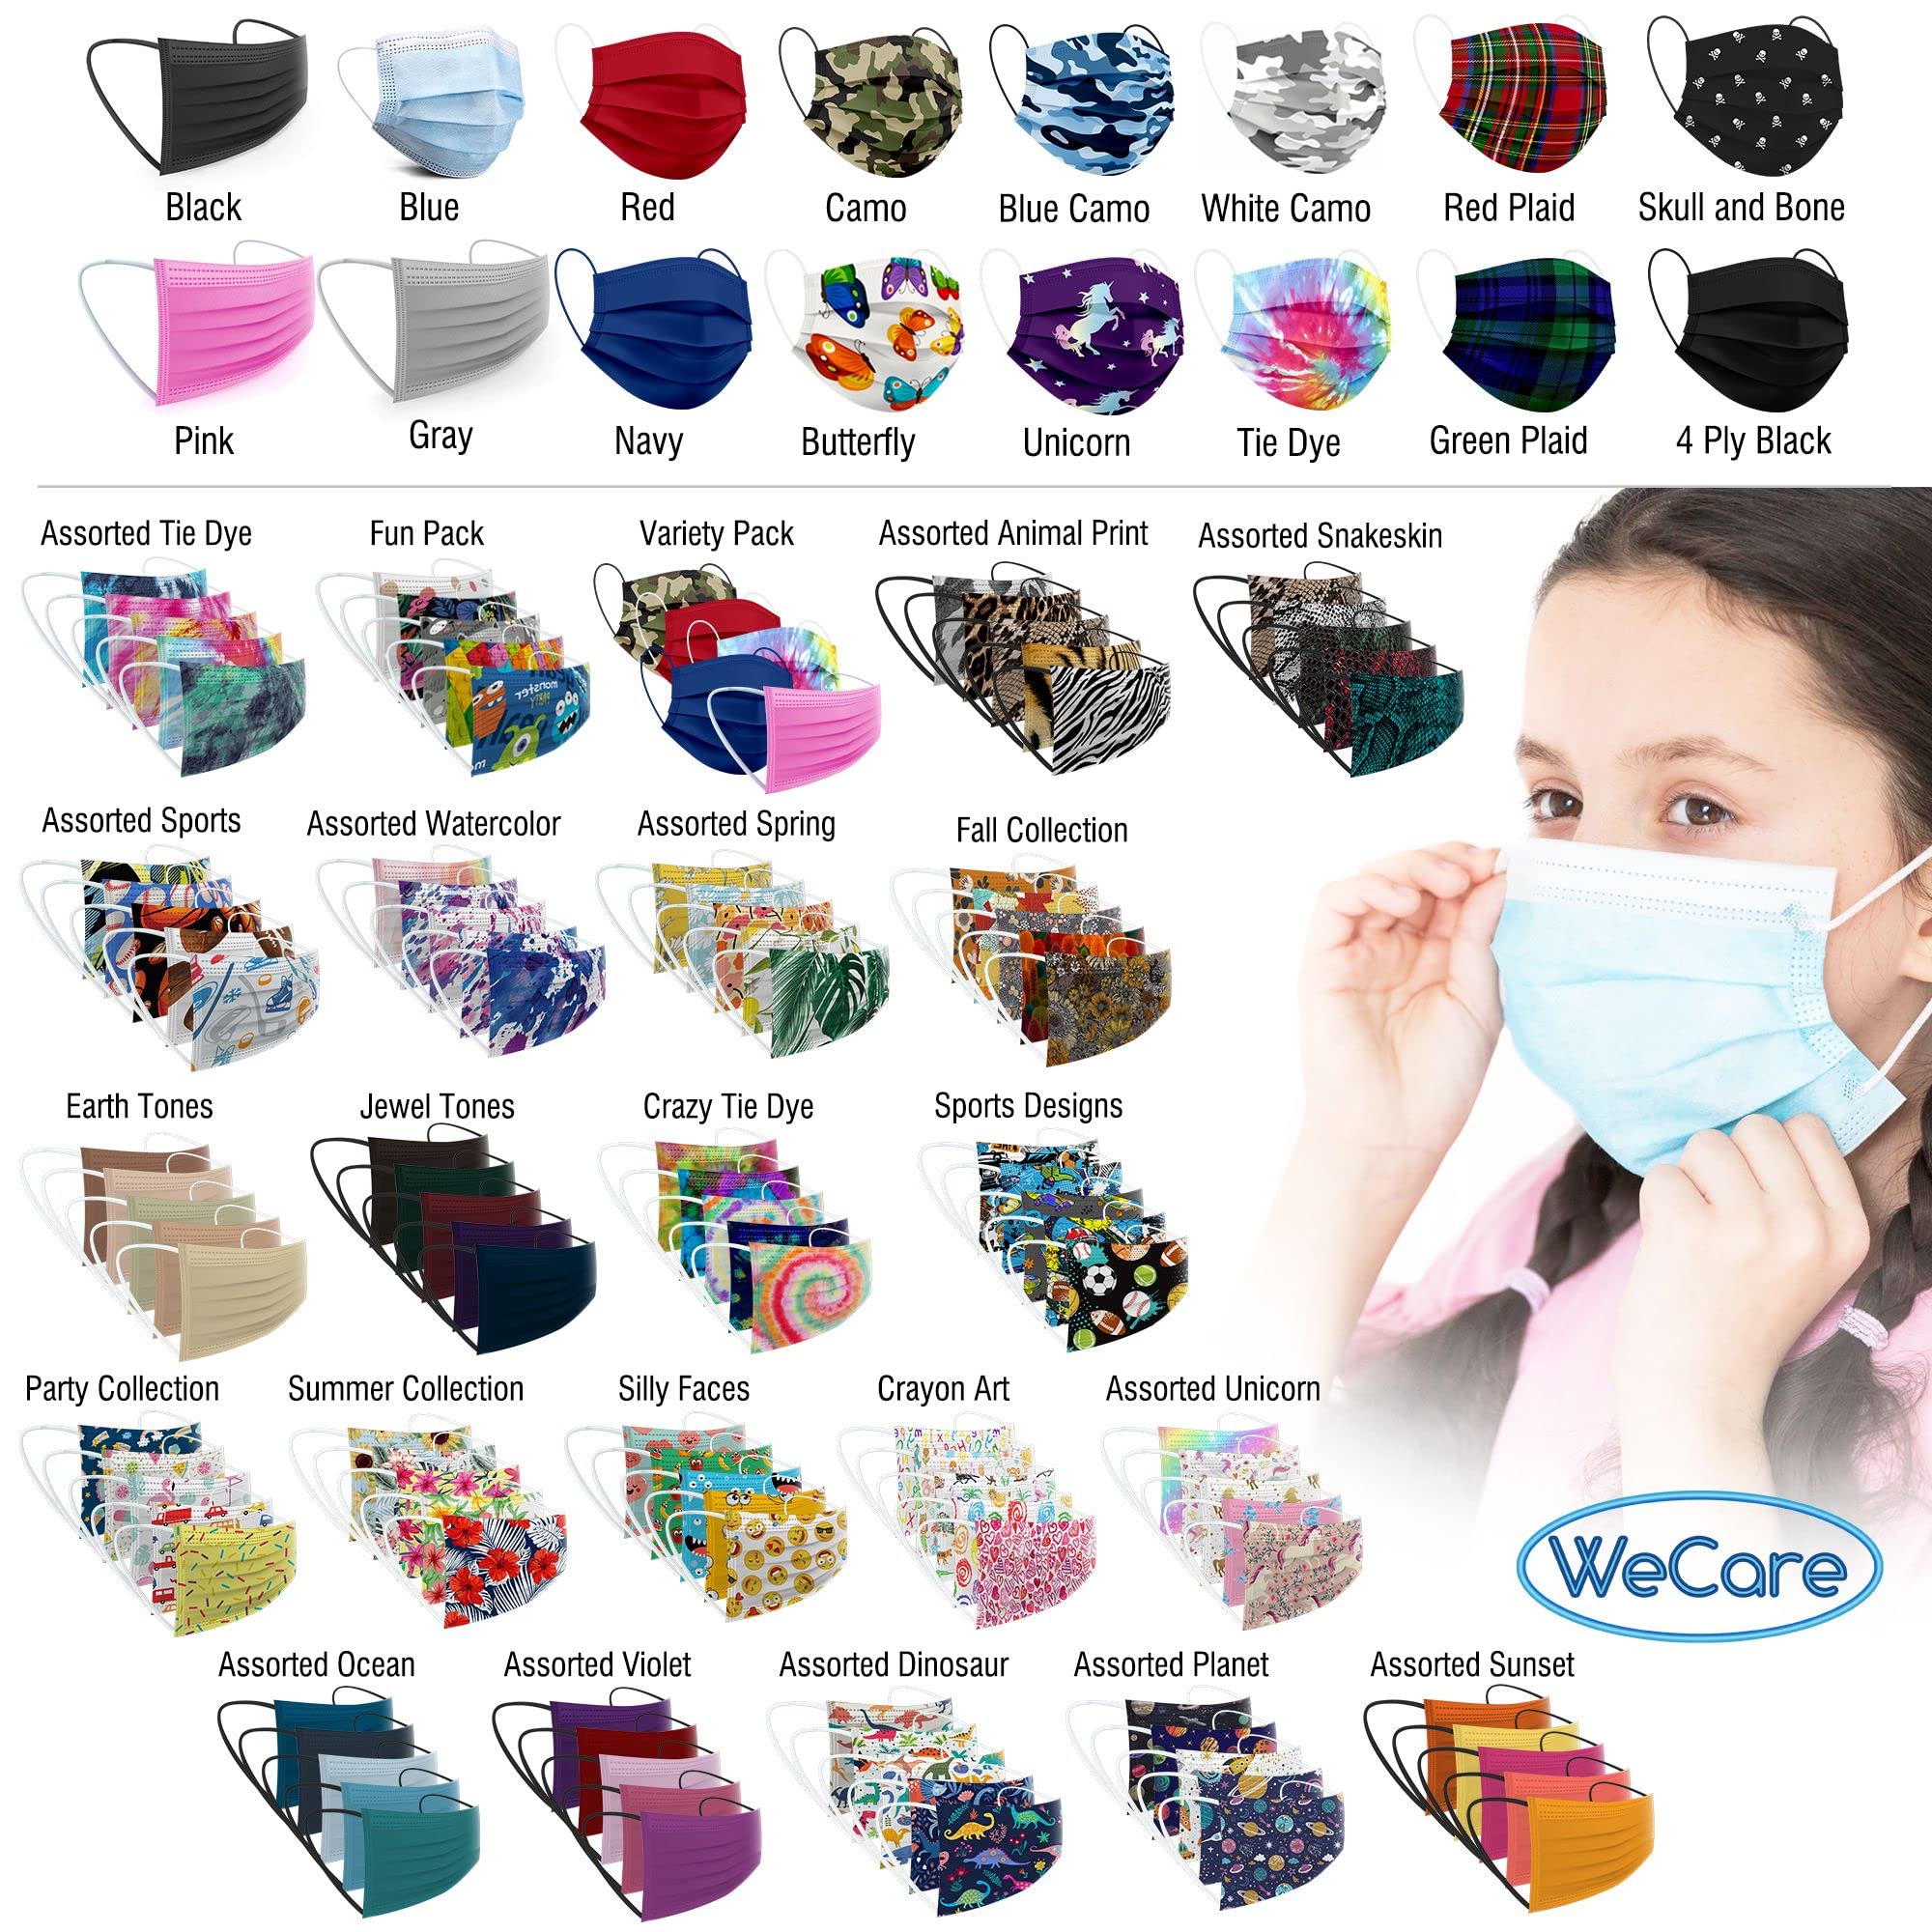 WECARE Disposable Face Masks For Kids, 50 Print Masks, Individually Wrapped for School and Travel (Fun Pack)